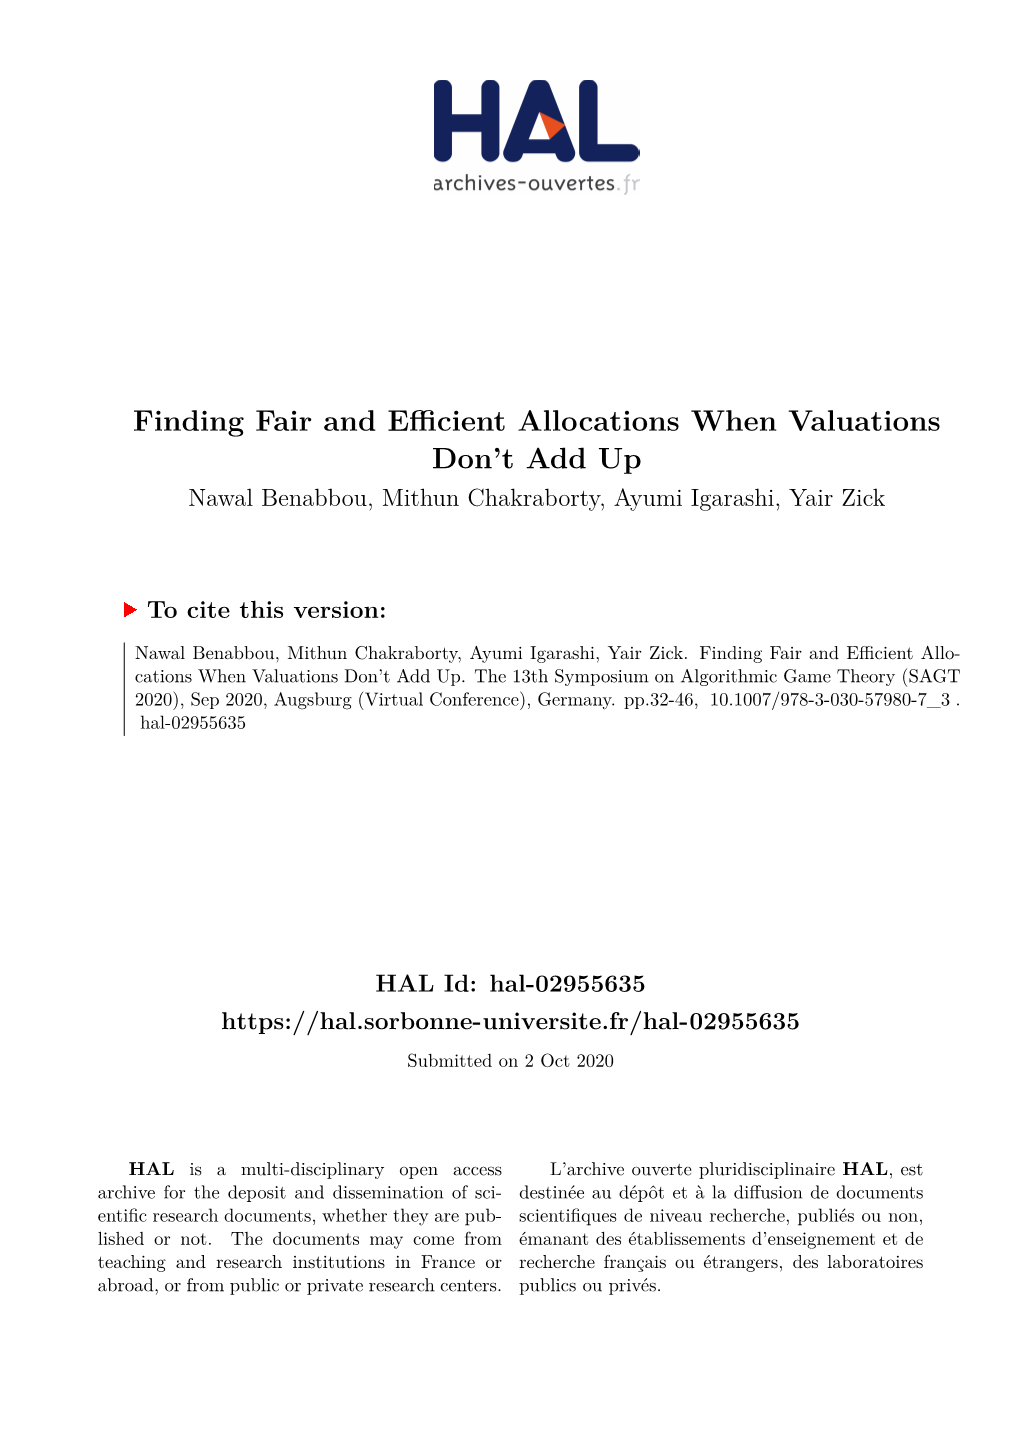 Finding Fair and Efficient Allocations When Valuations Don't Add Up